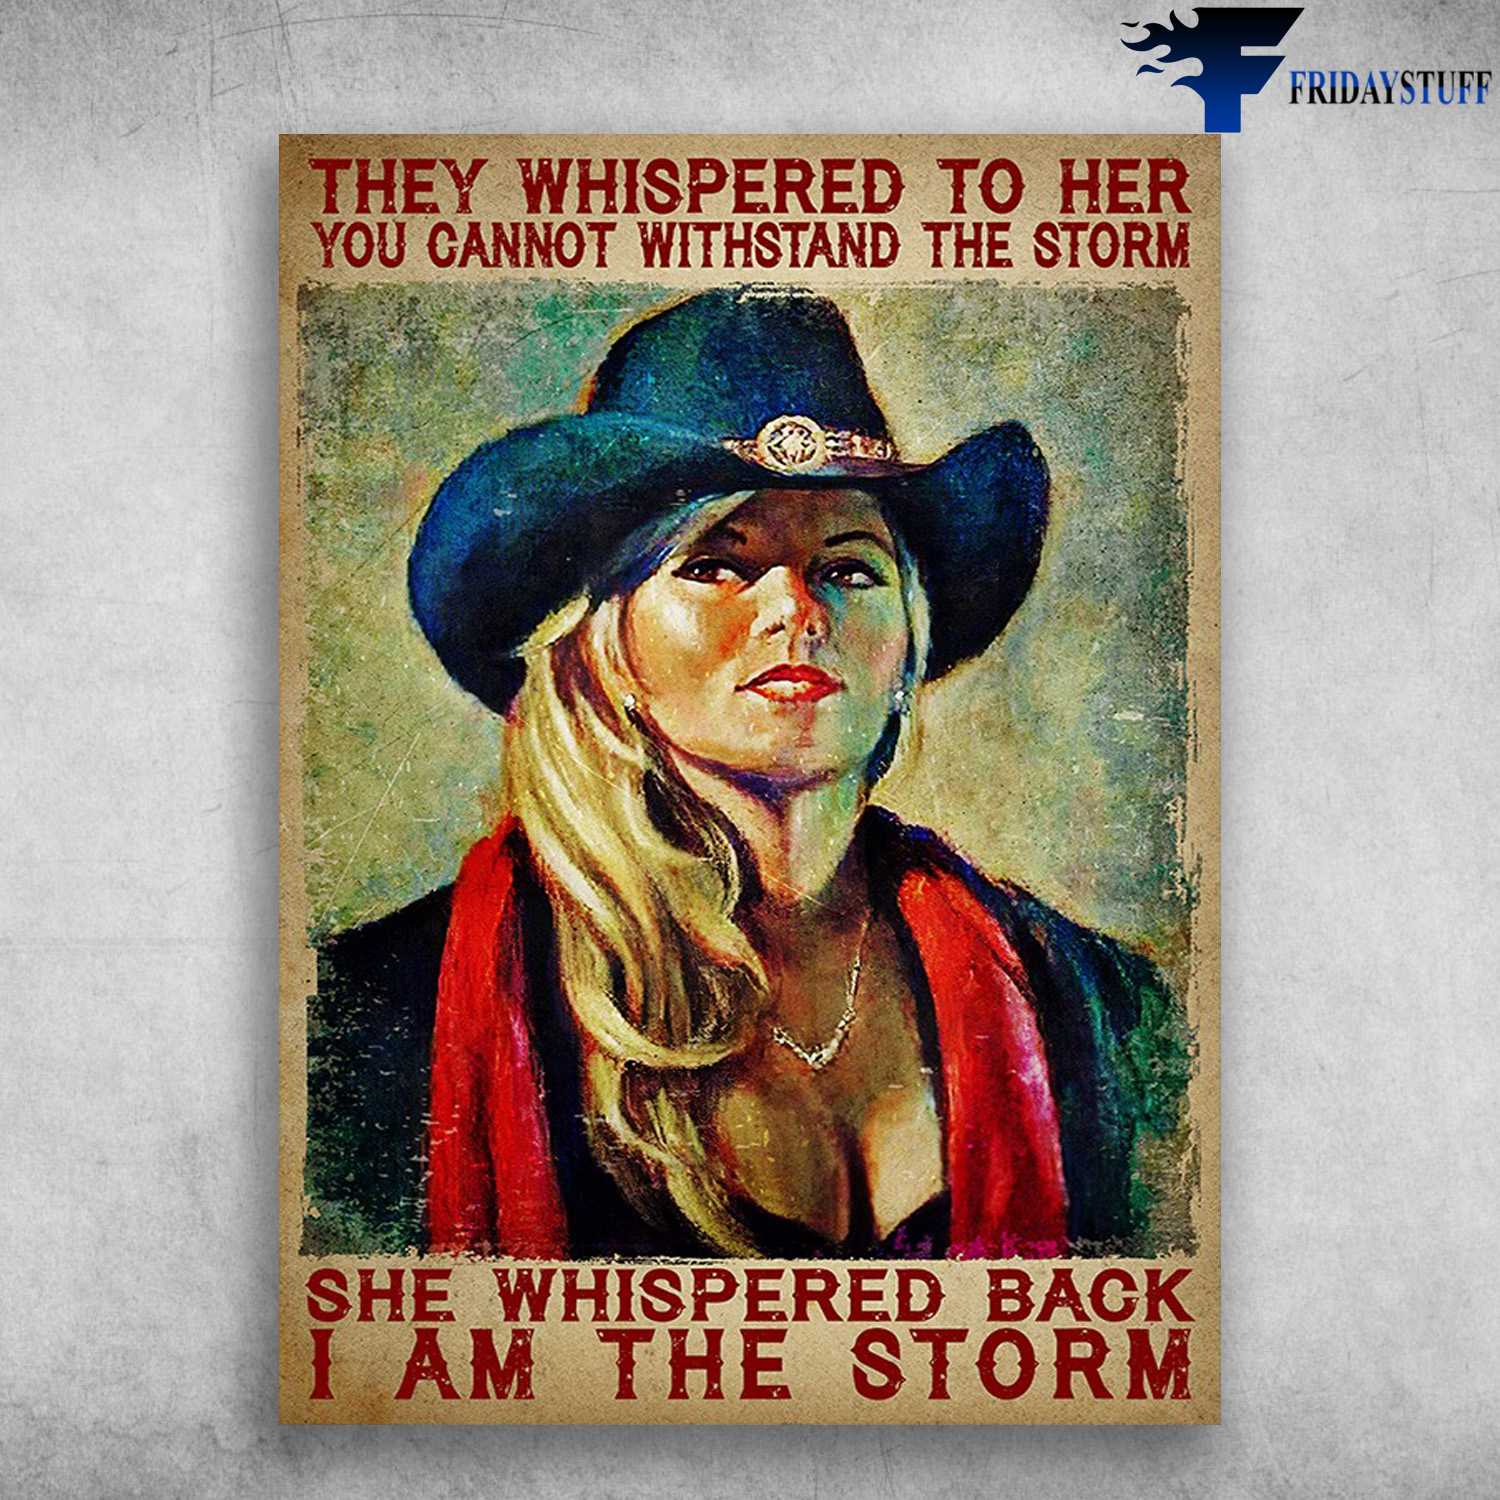 Cowgirl Poster - They Whispered To Her, You Cannot Withstsnf The Storm, She Whispered Back, I Am The Storm